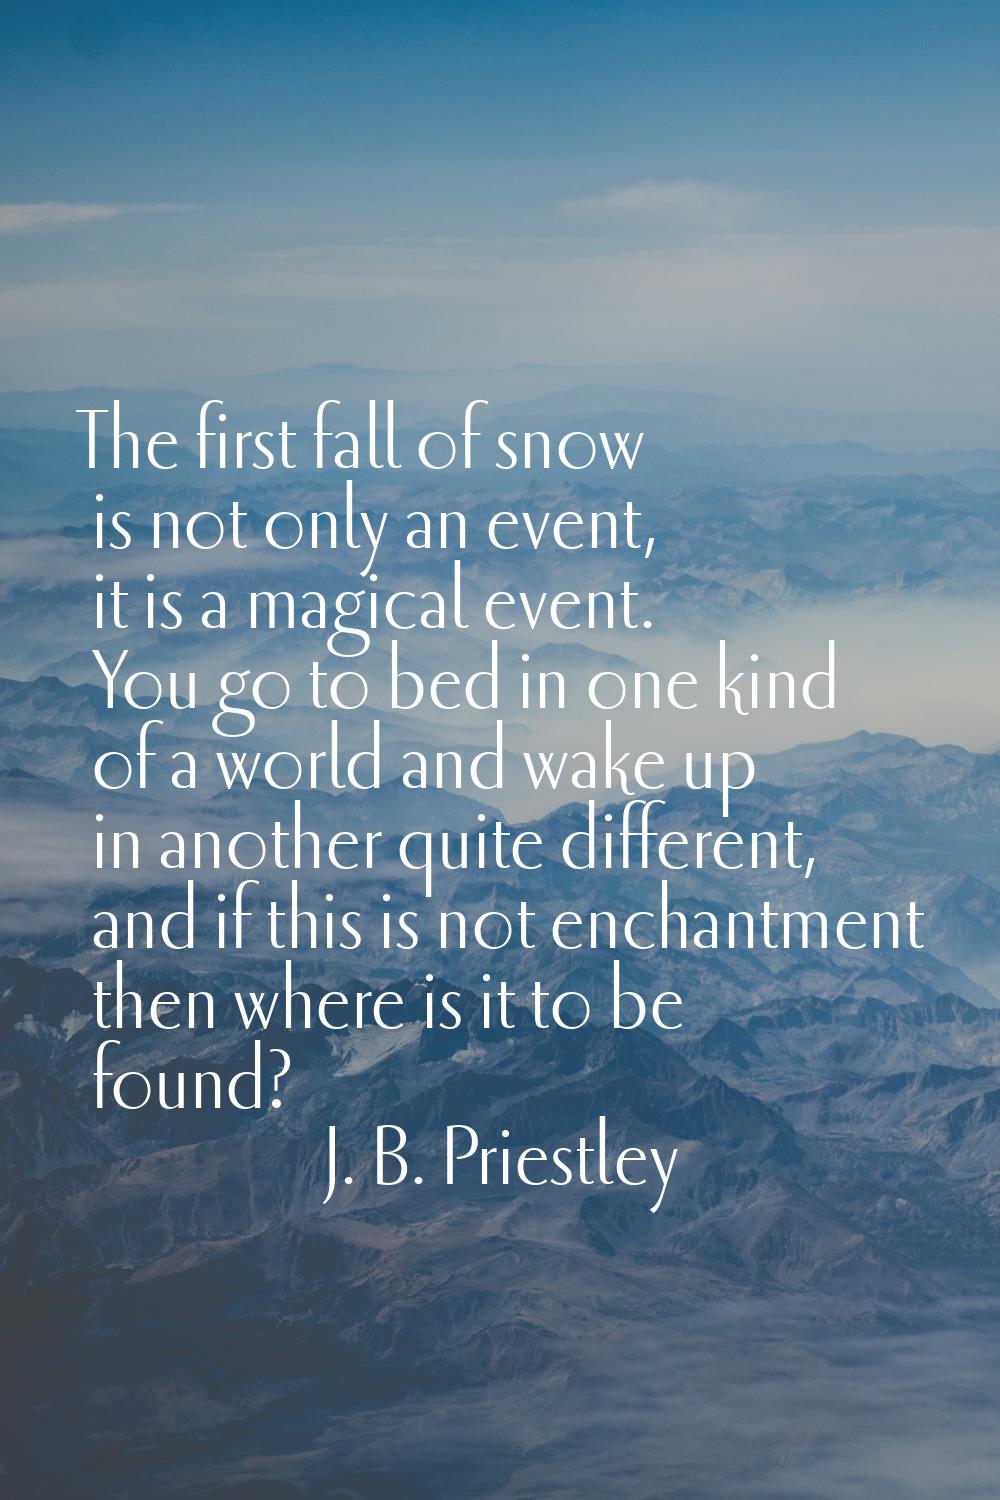 The first fall of snow is not only an event, it is a magical event. You go to bed in one kind of a 